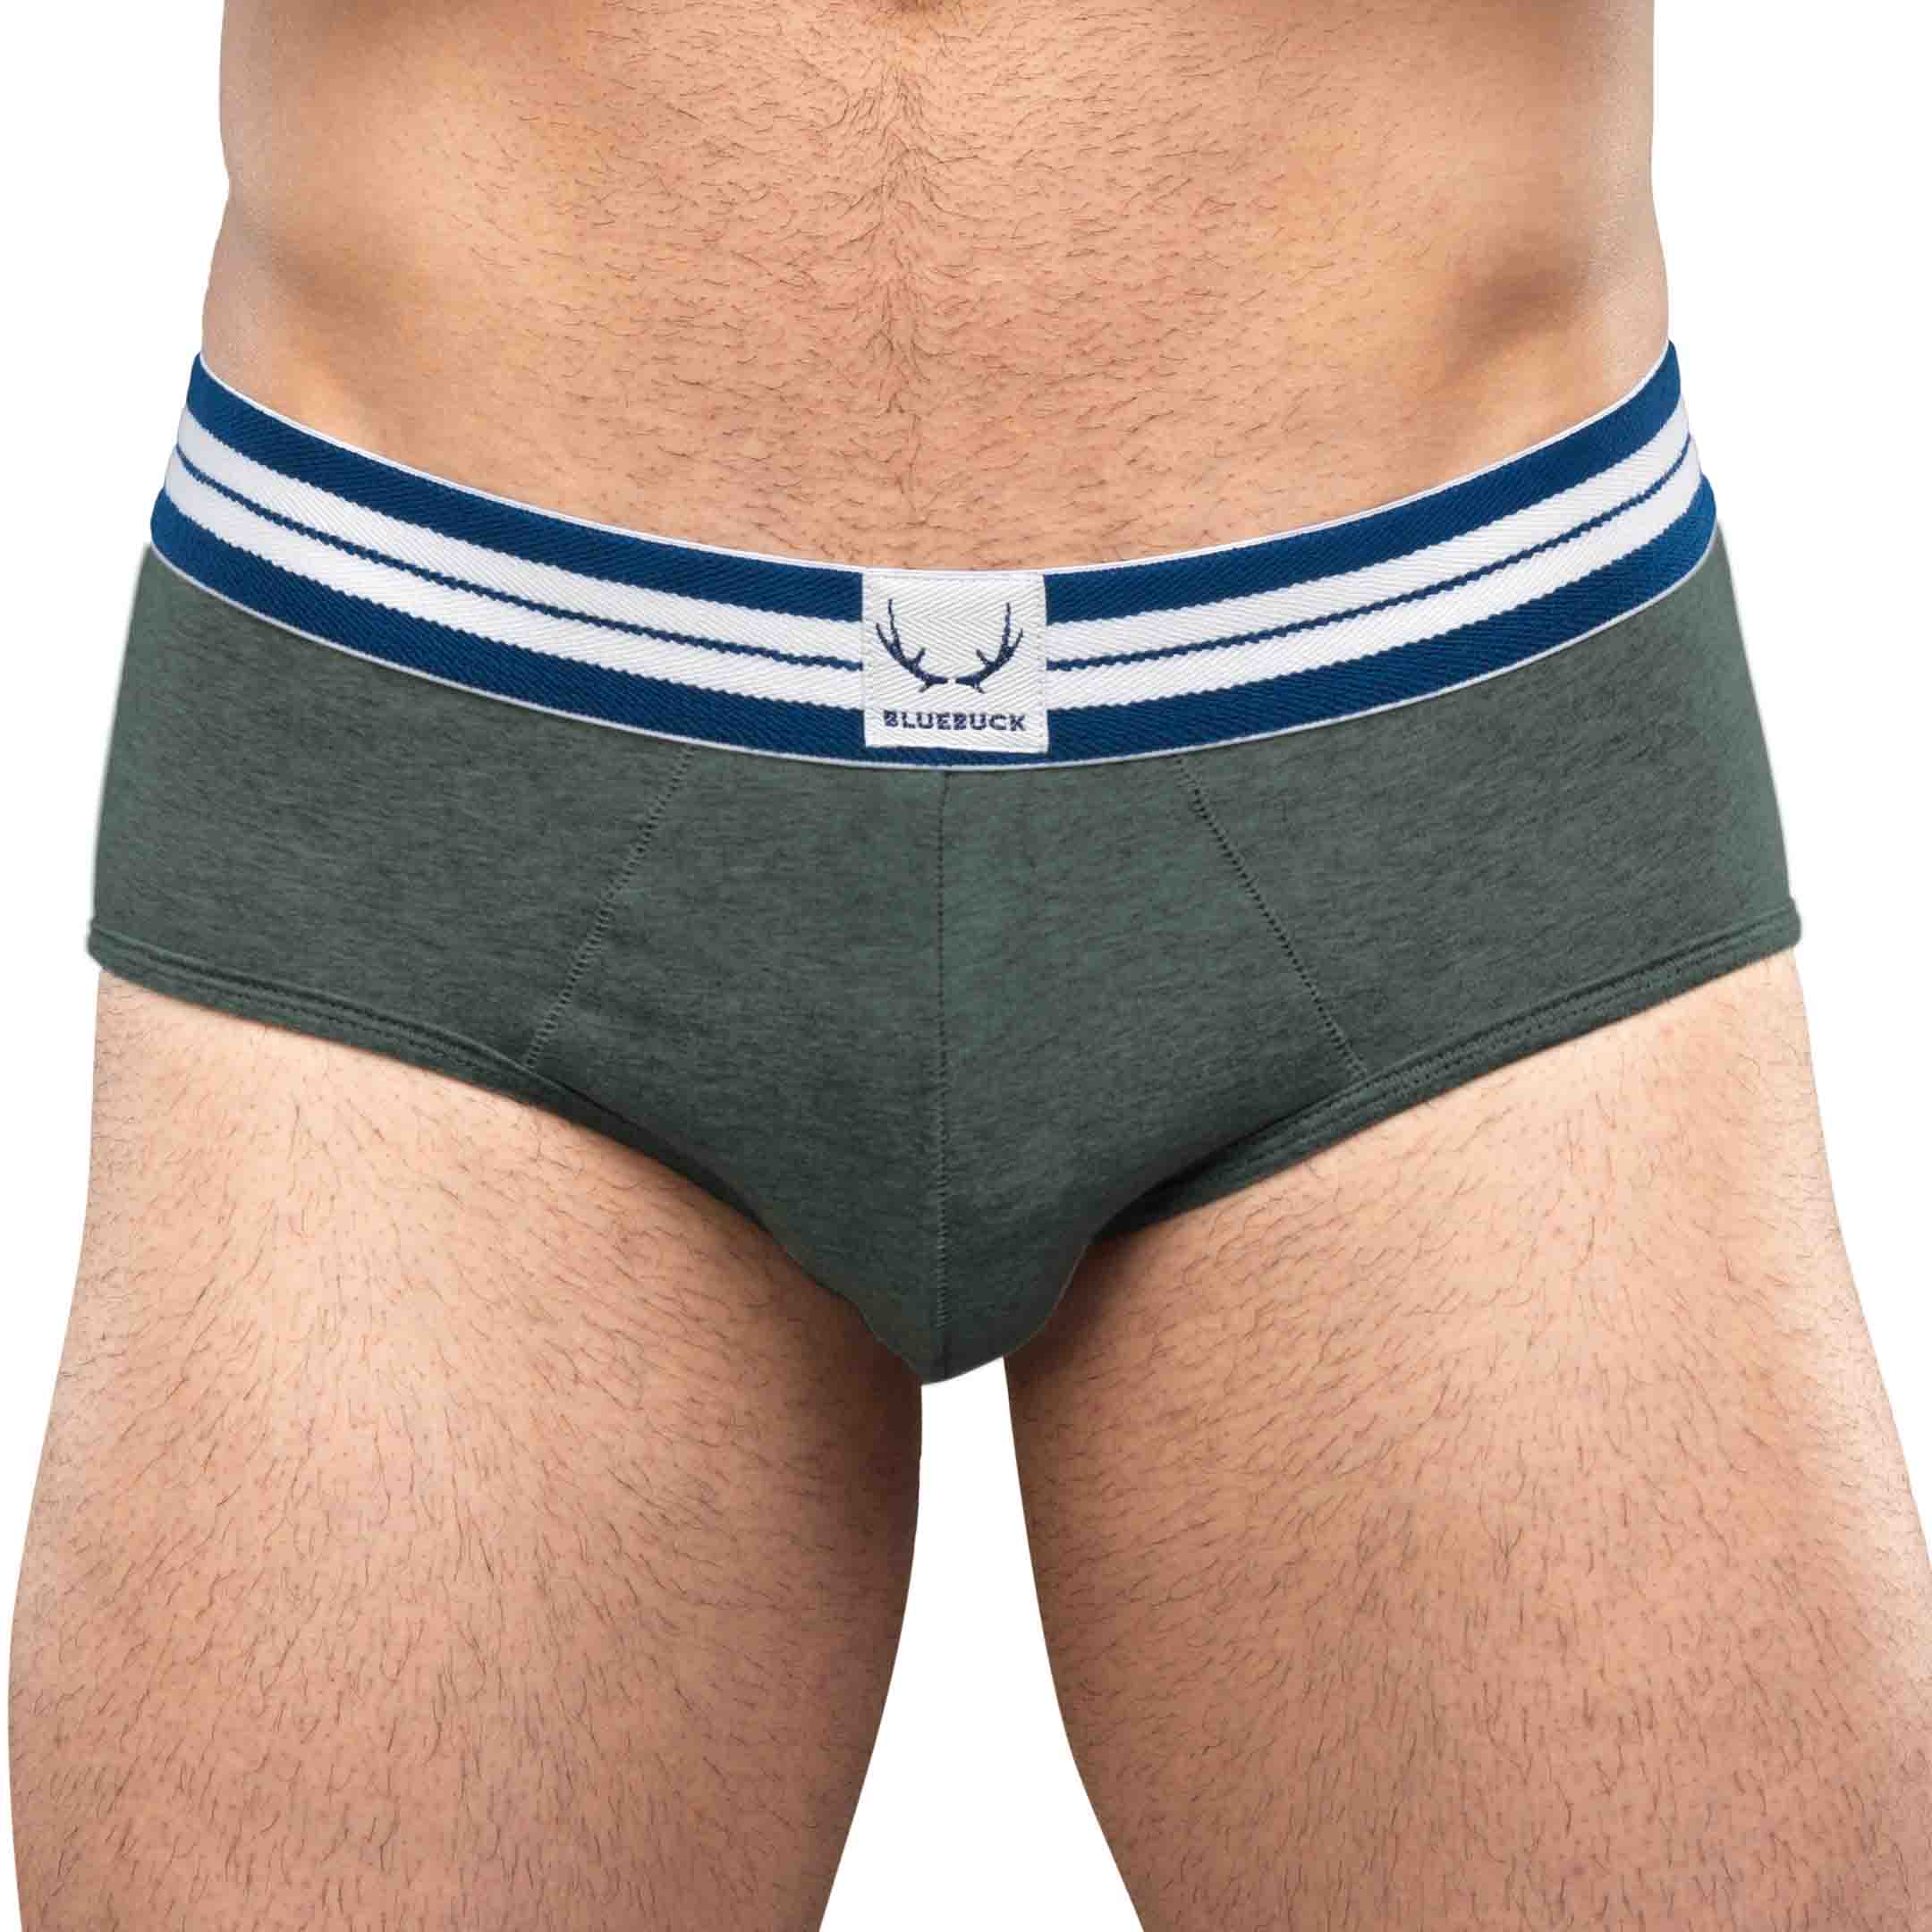 Dark green underpants made of organic cotton from Bluebuck